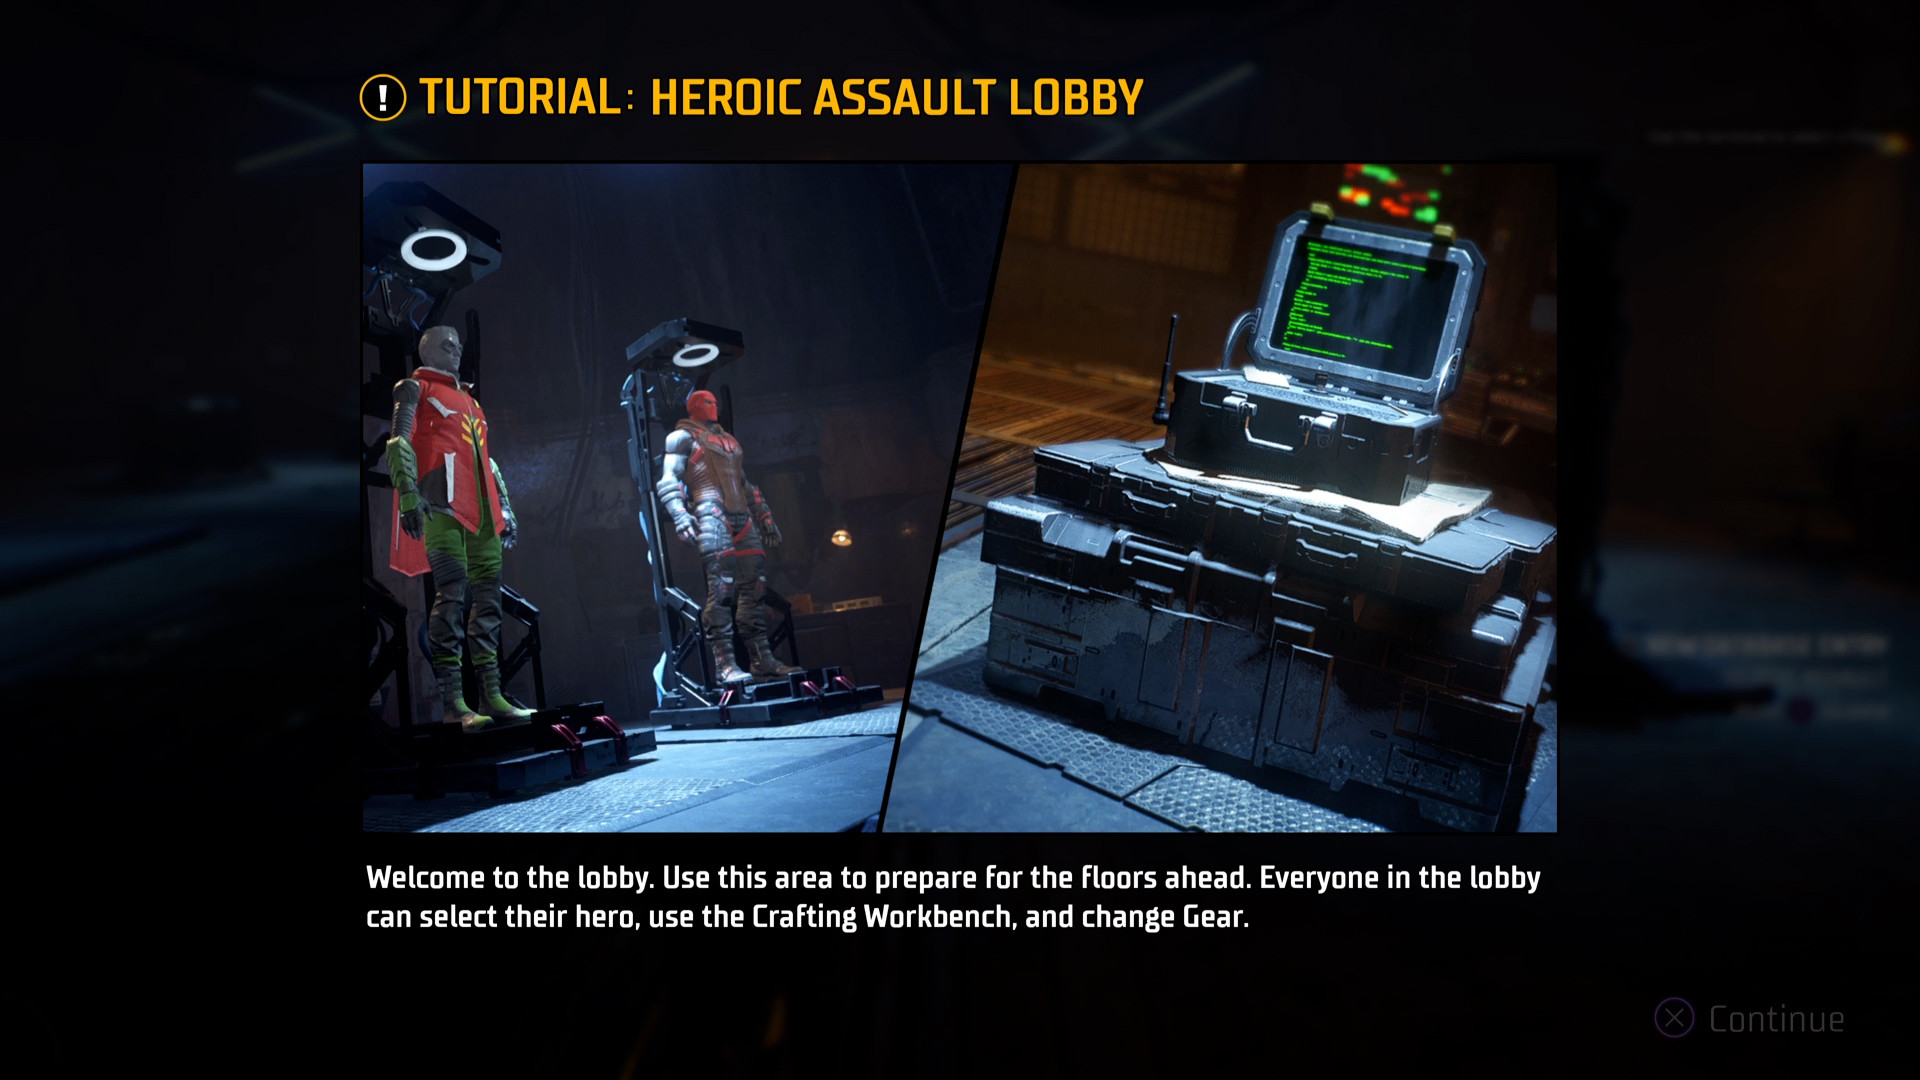 Heroic Assault trophies in Gotham Knights